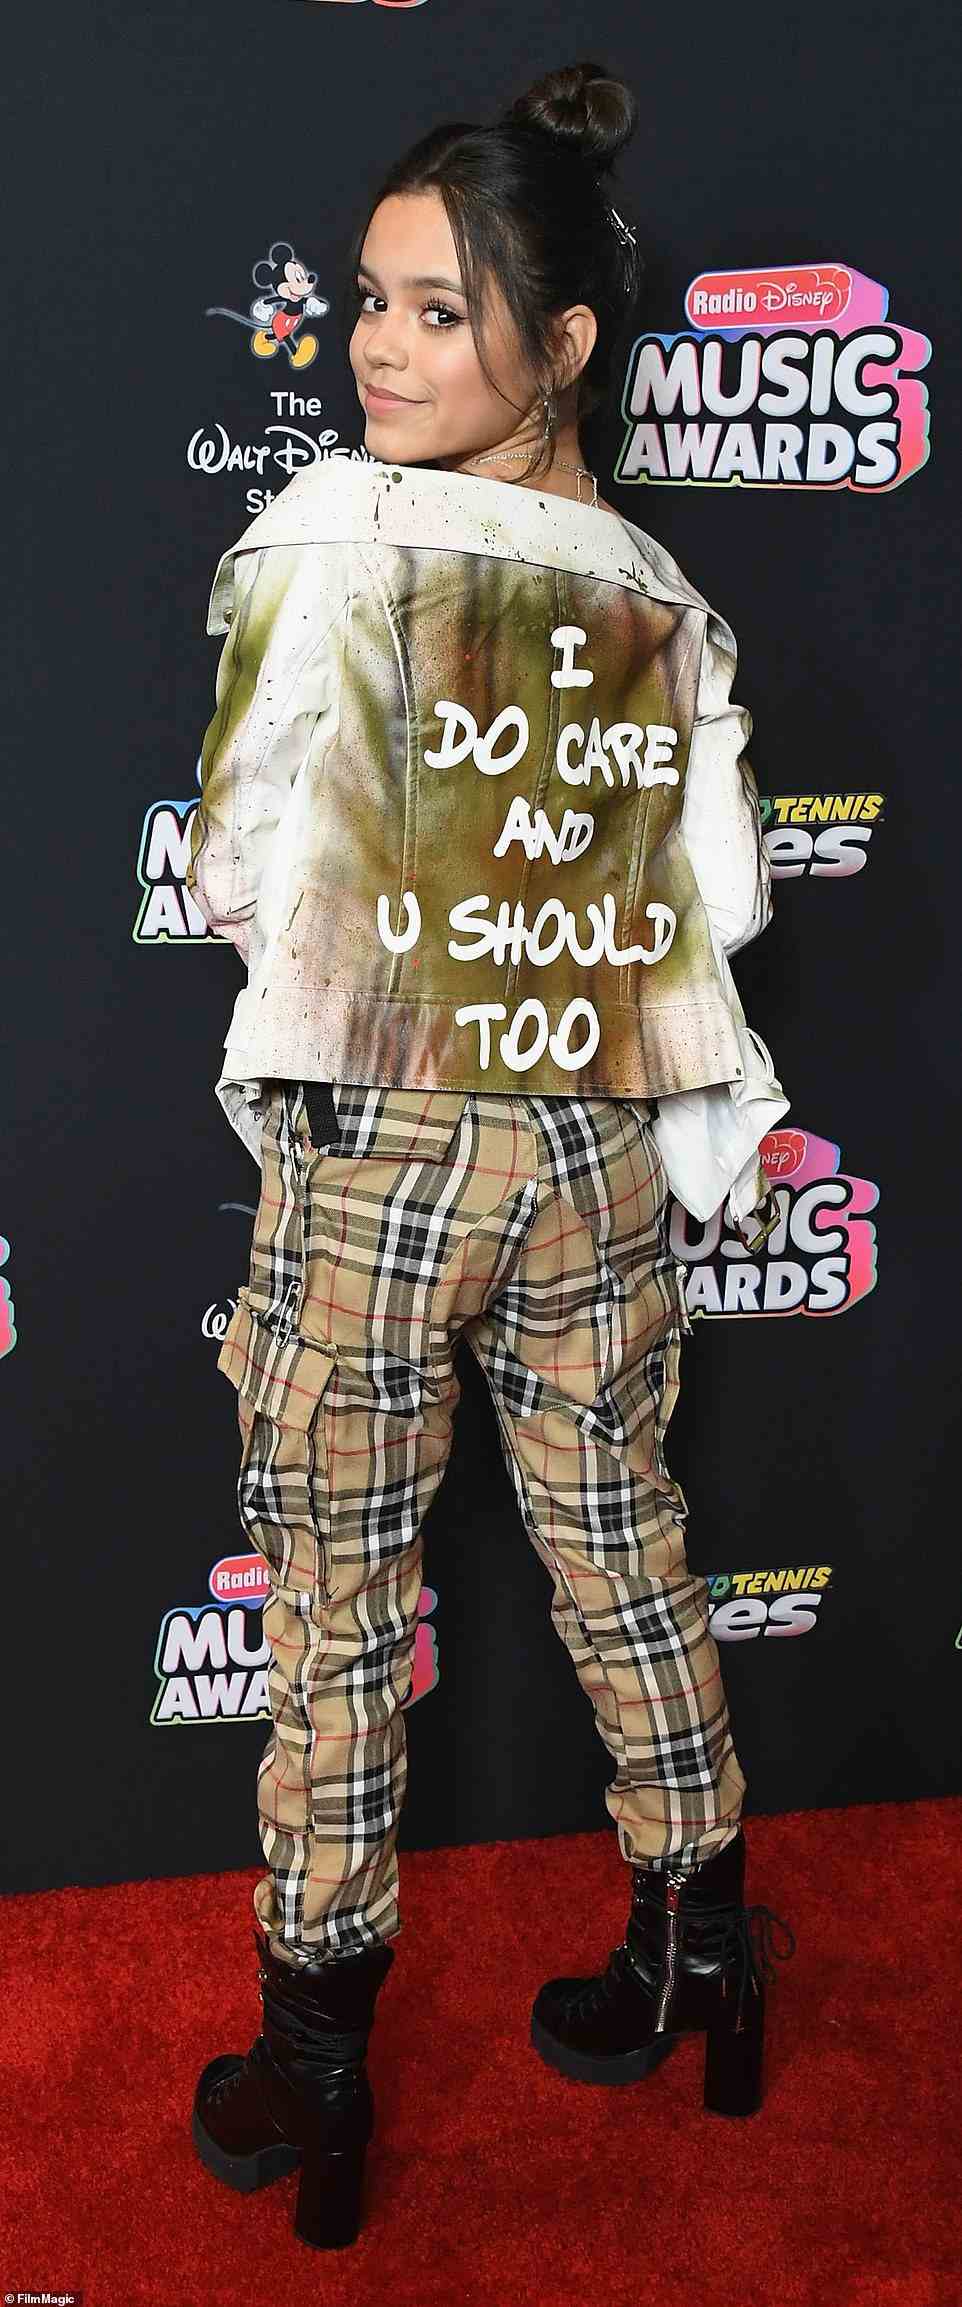 In 2018, she made headlines when she attended the Radio Disney Music Awards wearing a jacket that had the words 'I do care and you should too' written on the back